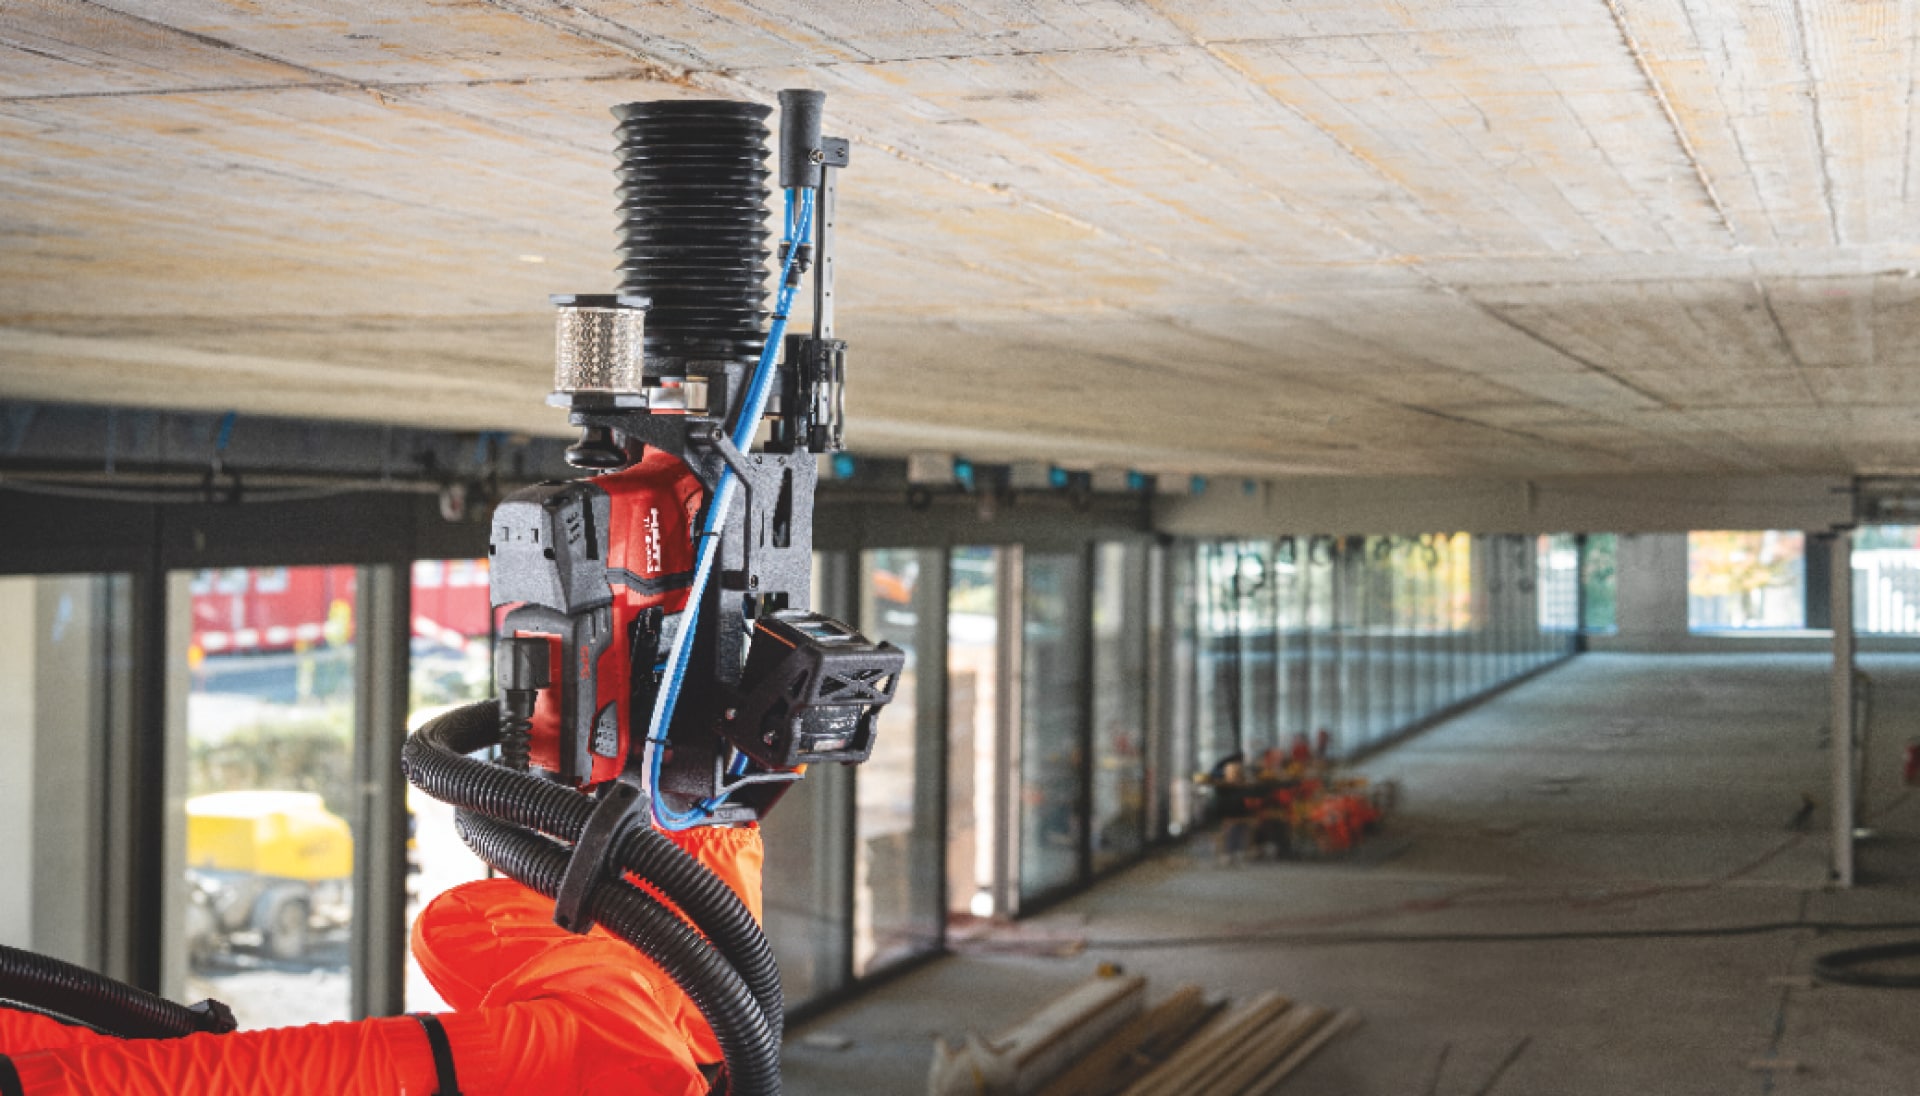 Concrete ceiling and construction robot drilling on a jobsite.